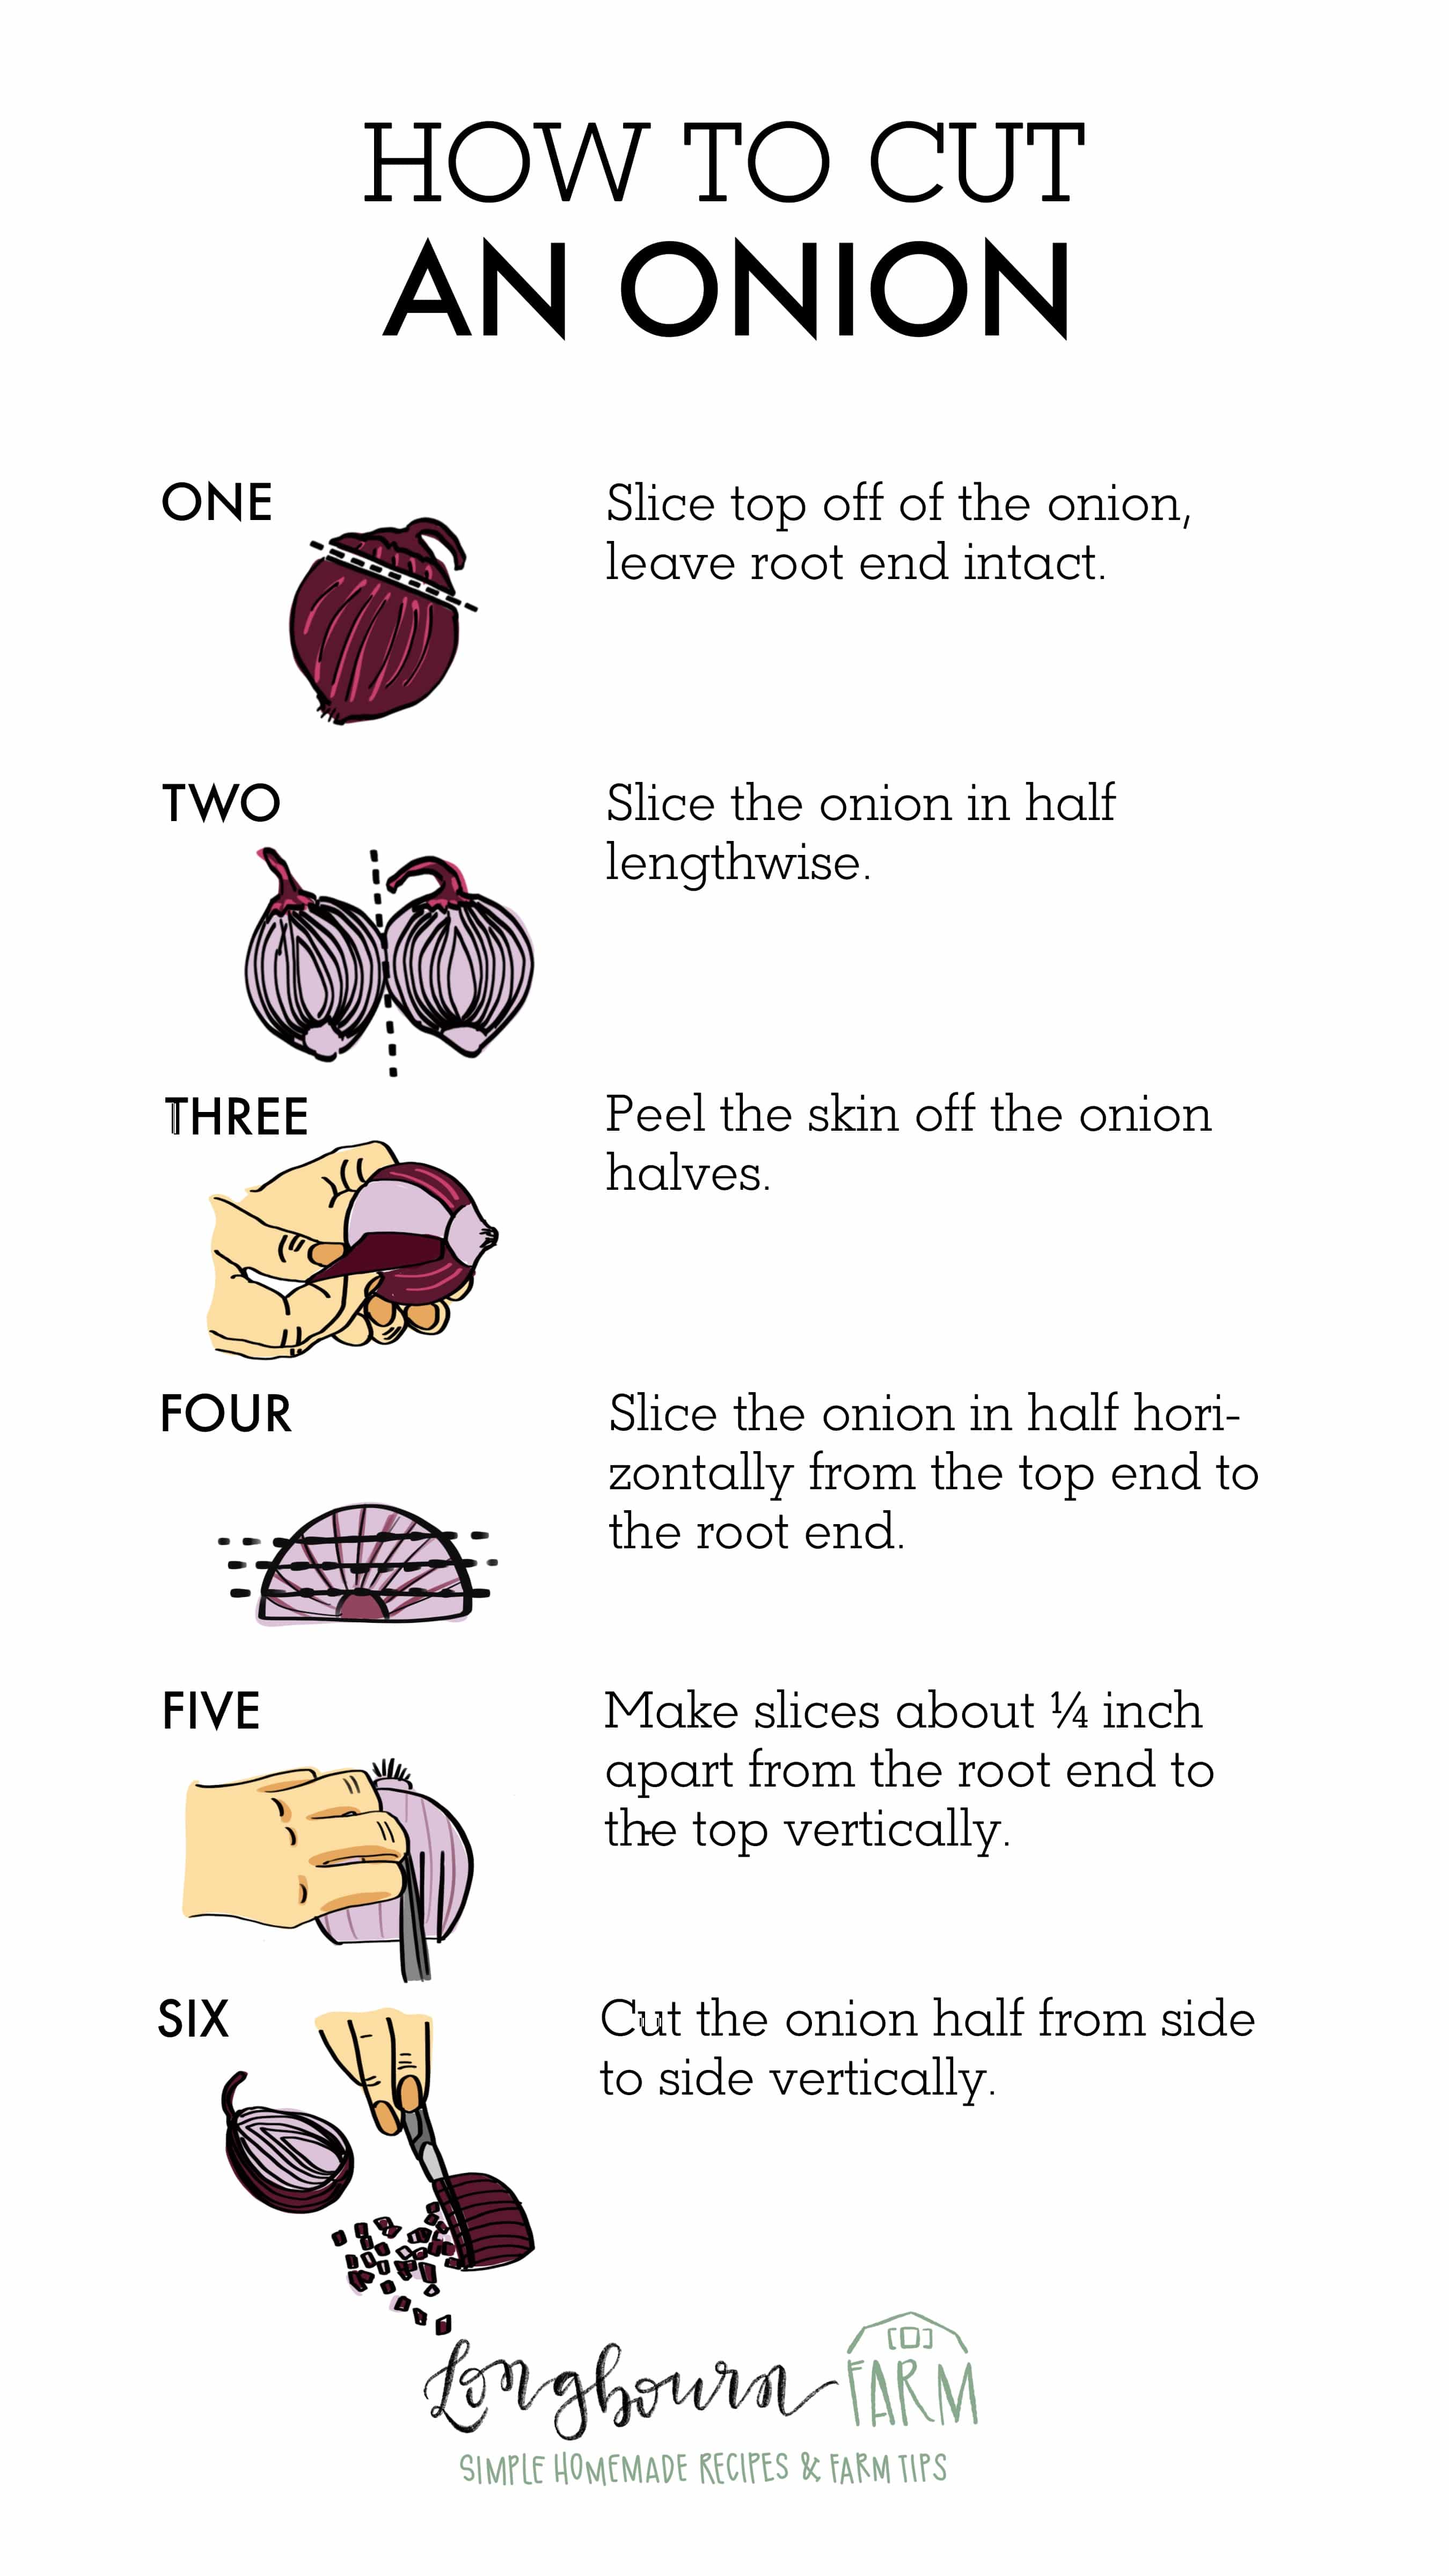 Learn how to cut an onion the right way!! Save so much time in the kitchen by following this easy tutorial. Don't let the prep keep you from cooking! #onion #howtocutanonion #knifetips #cuttinganonion #cutanonion